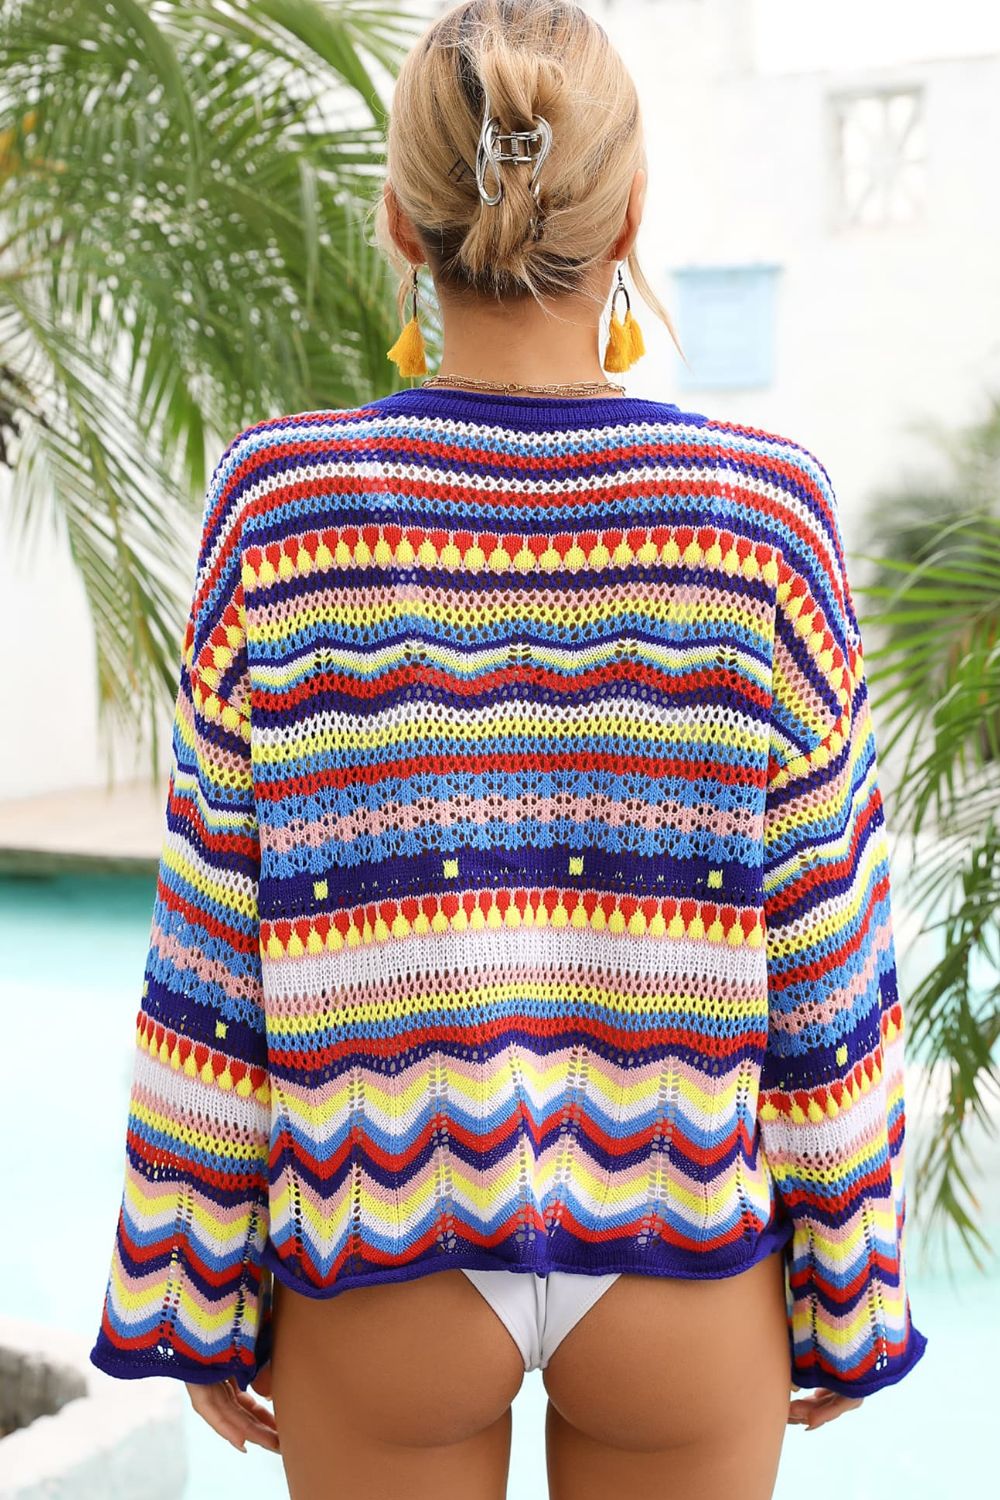 Multicolored Crochet Cover Up Top Stripe Round Neck Coverup  Sunset and Swim   